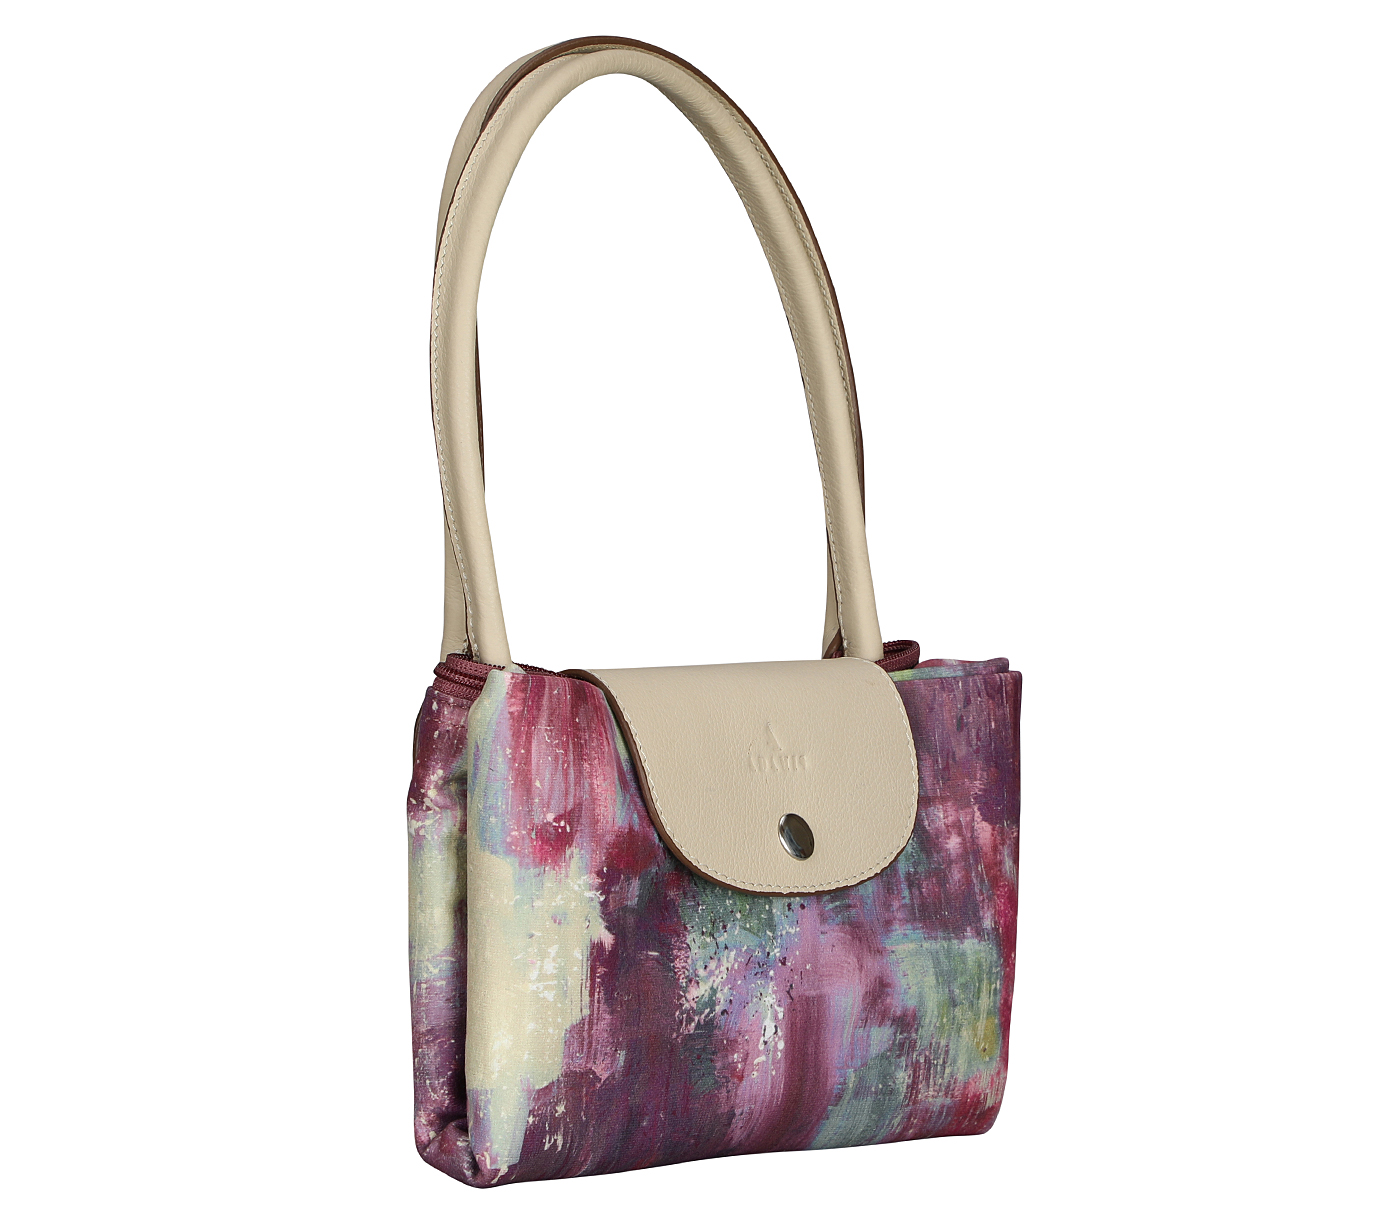 B882--Adelina Folding Tote Bag In Leaf Print Material With Genuine Leather Handles And Flap - Wine